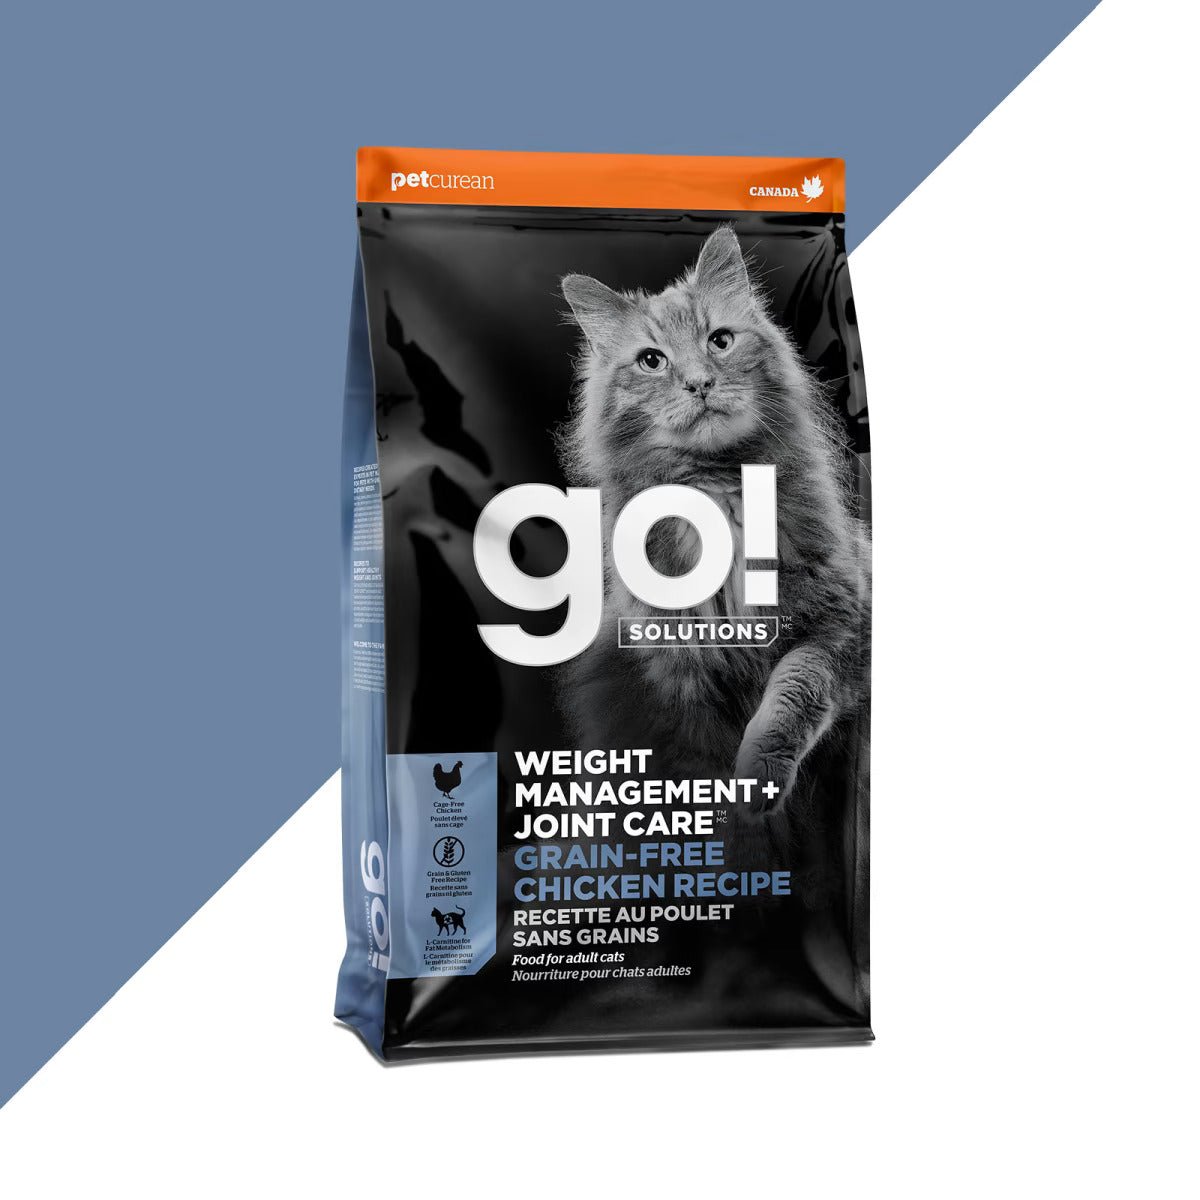 Weight Management + Joint Care Grain-Free Chicken - Dry Cat Food - Go! Solutions